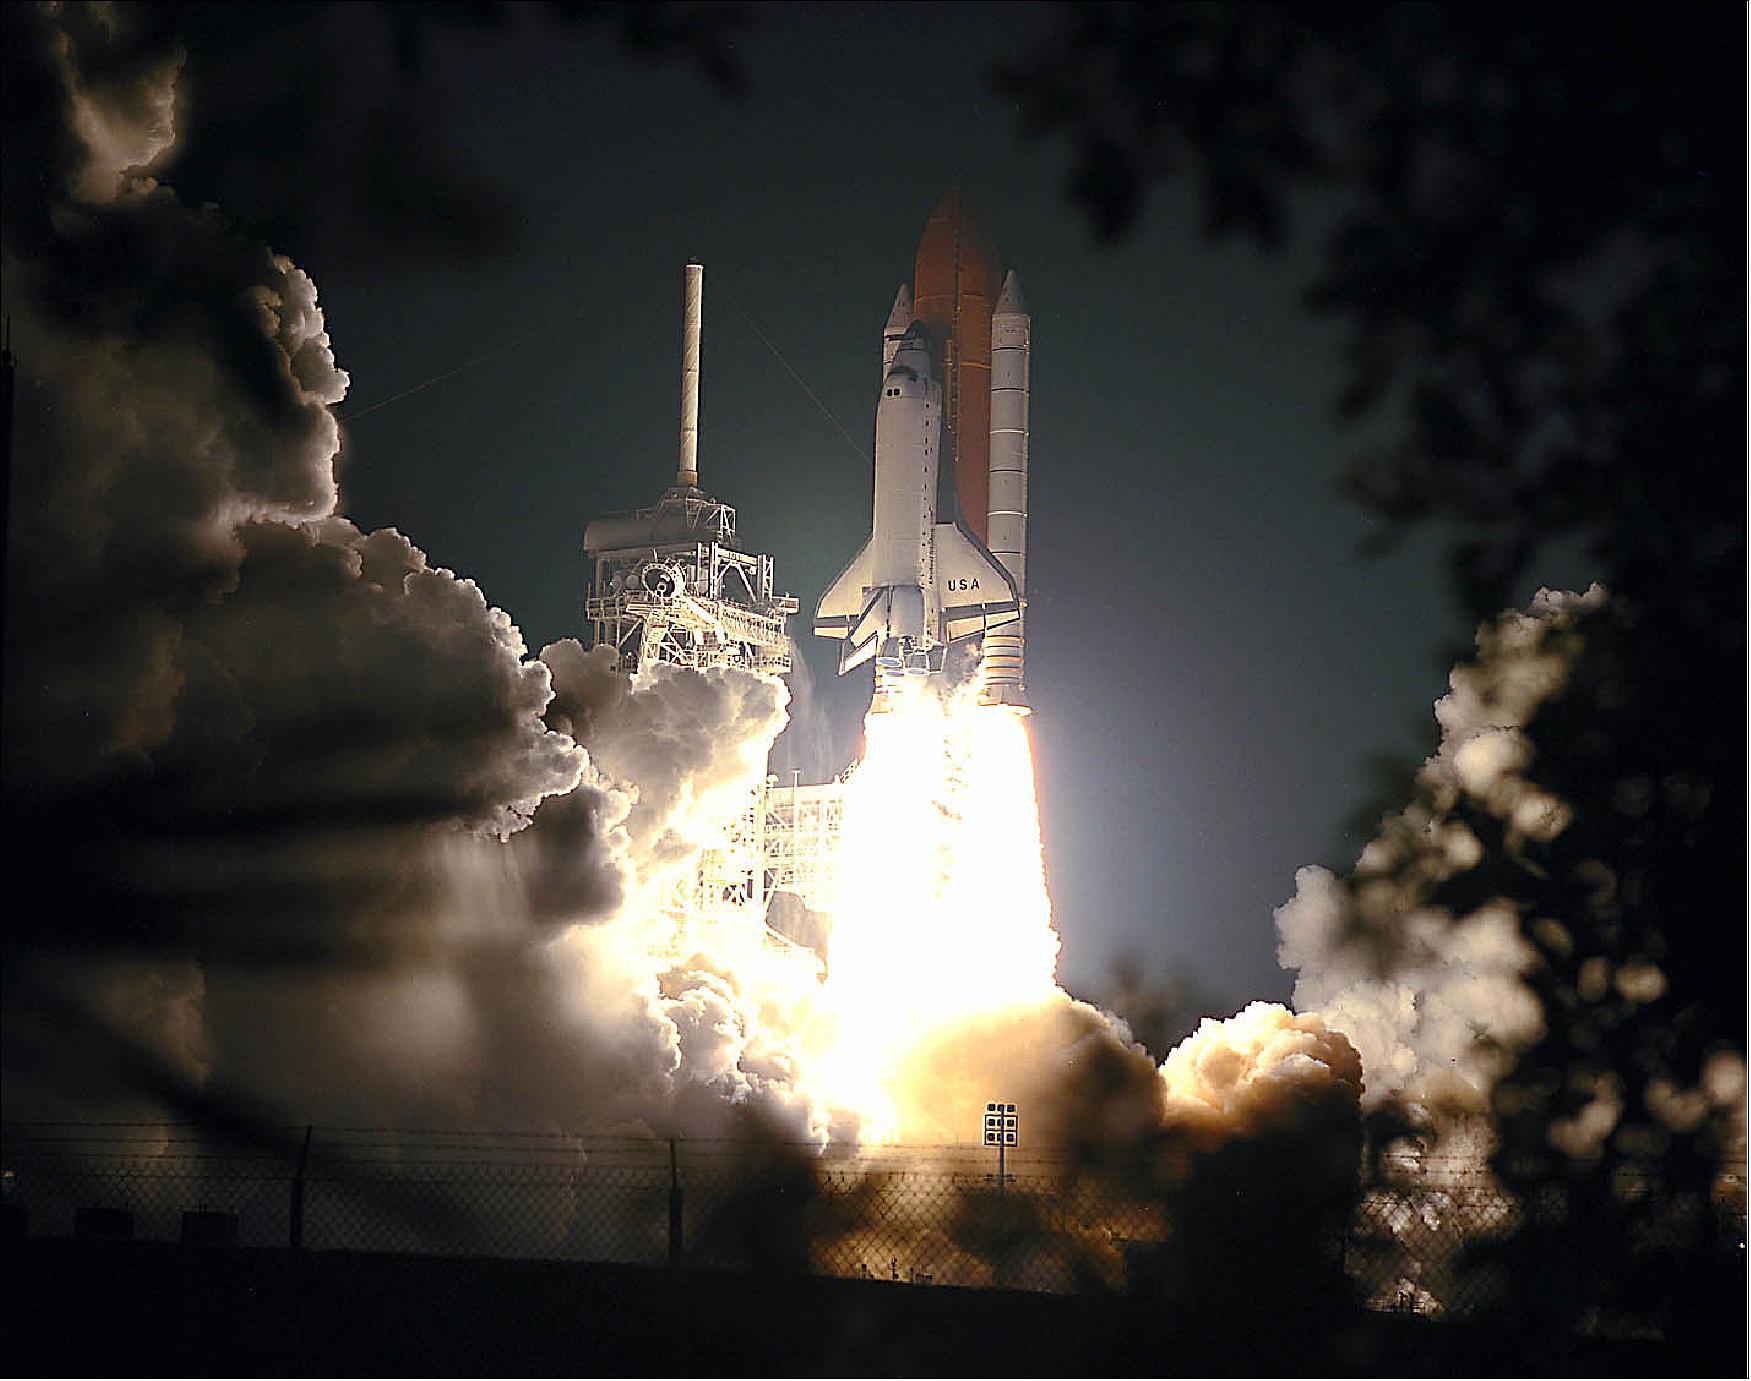 Figure 7: Photo of the Chandra spacecraft launch on STS-93 (image credit: NASA)